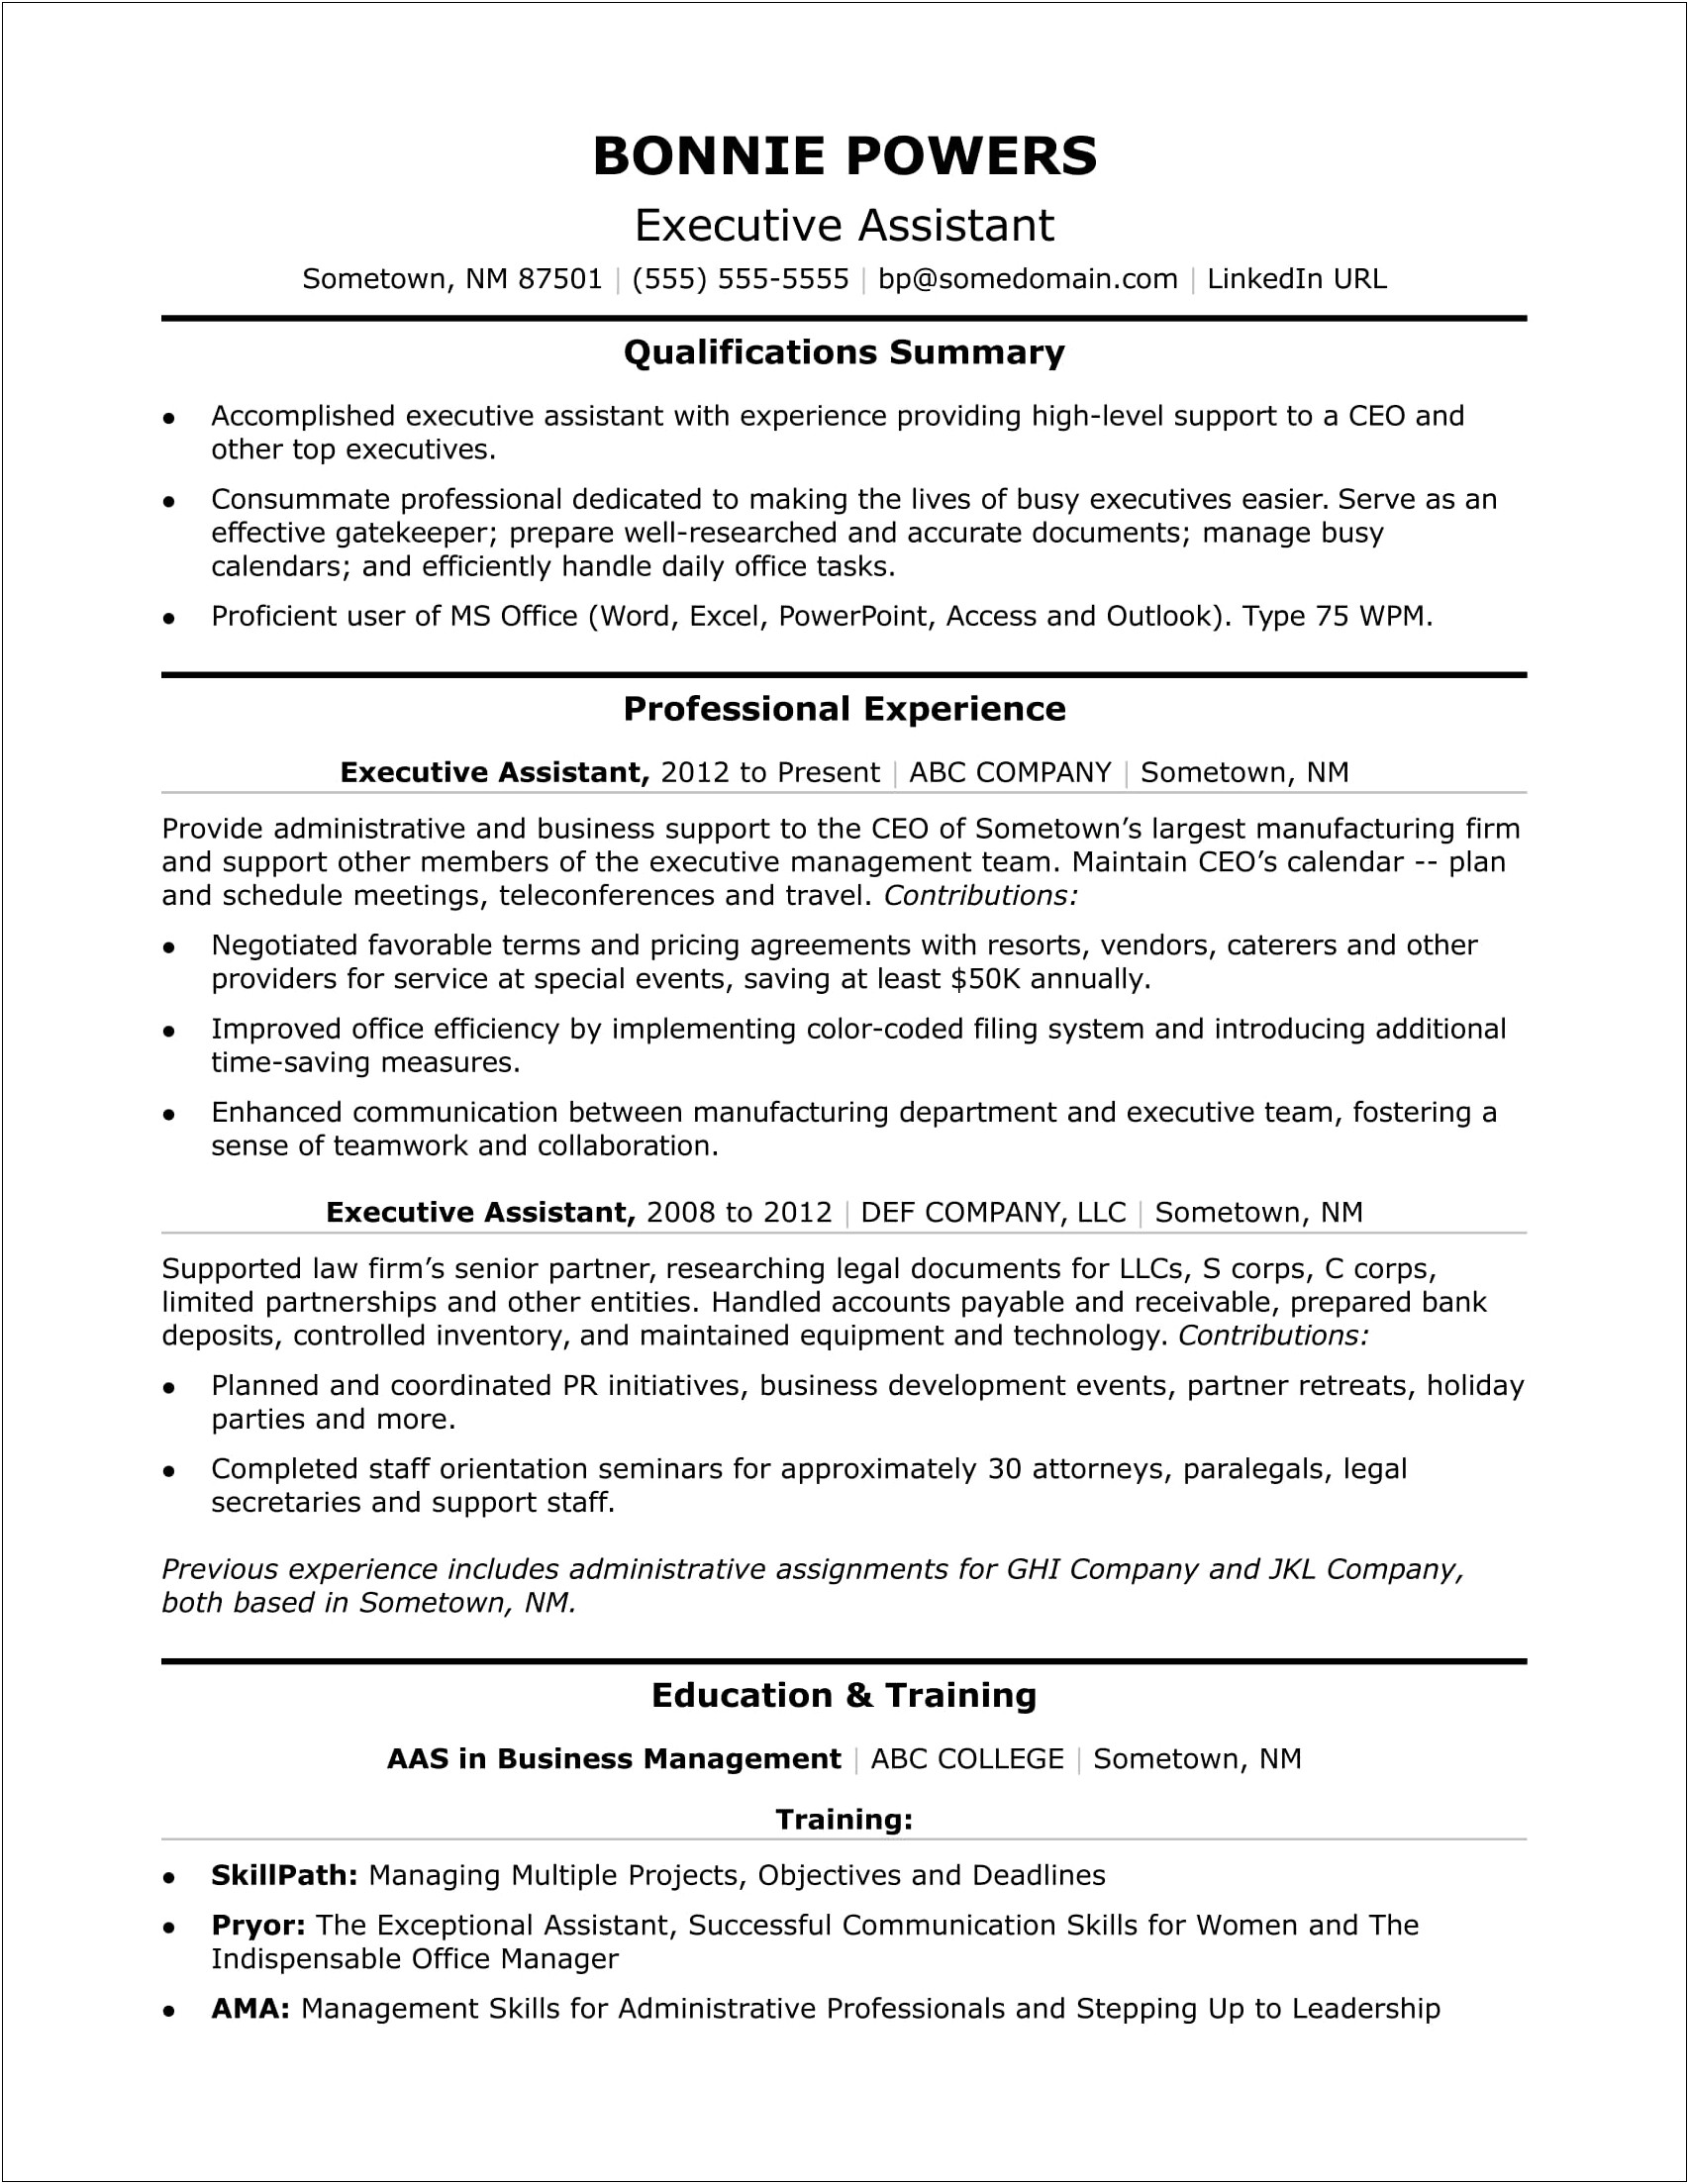 Executive Assistant Summary Section On Resume